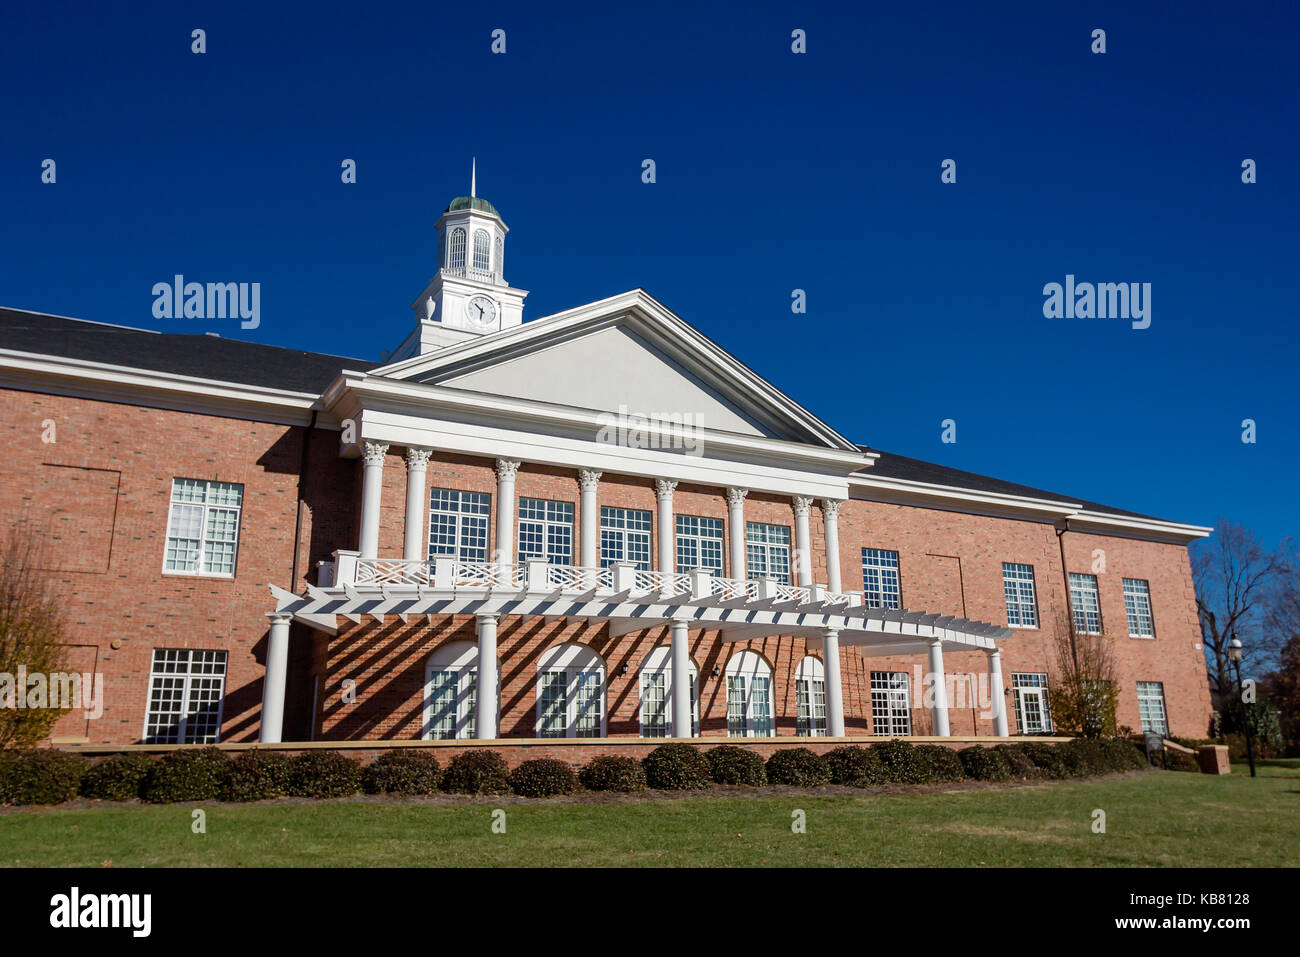 Martha S. and Carl H. Linder III Hall, College of Arts and Sciences at Elon University in Elon, North Carolina.  Built in 2009. Stock Photo